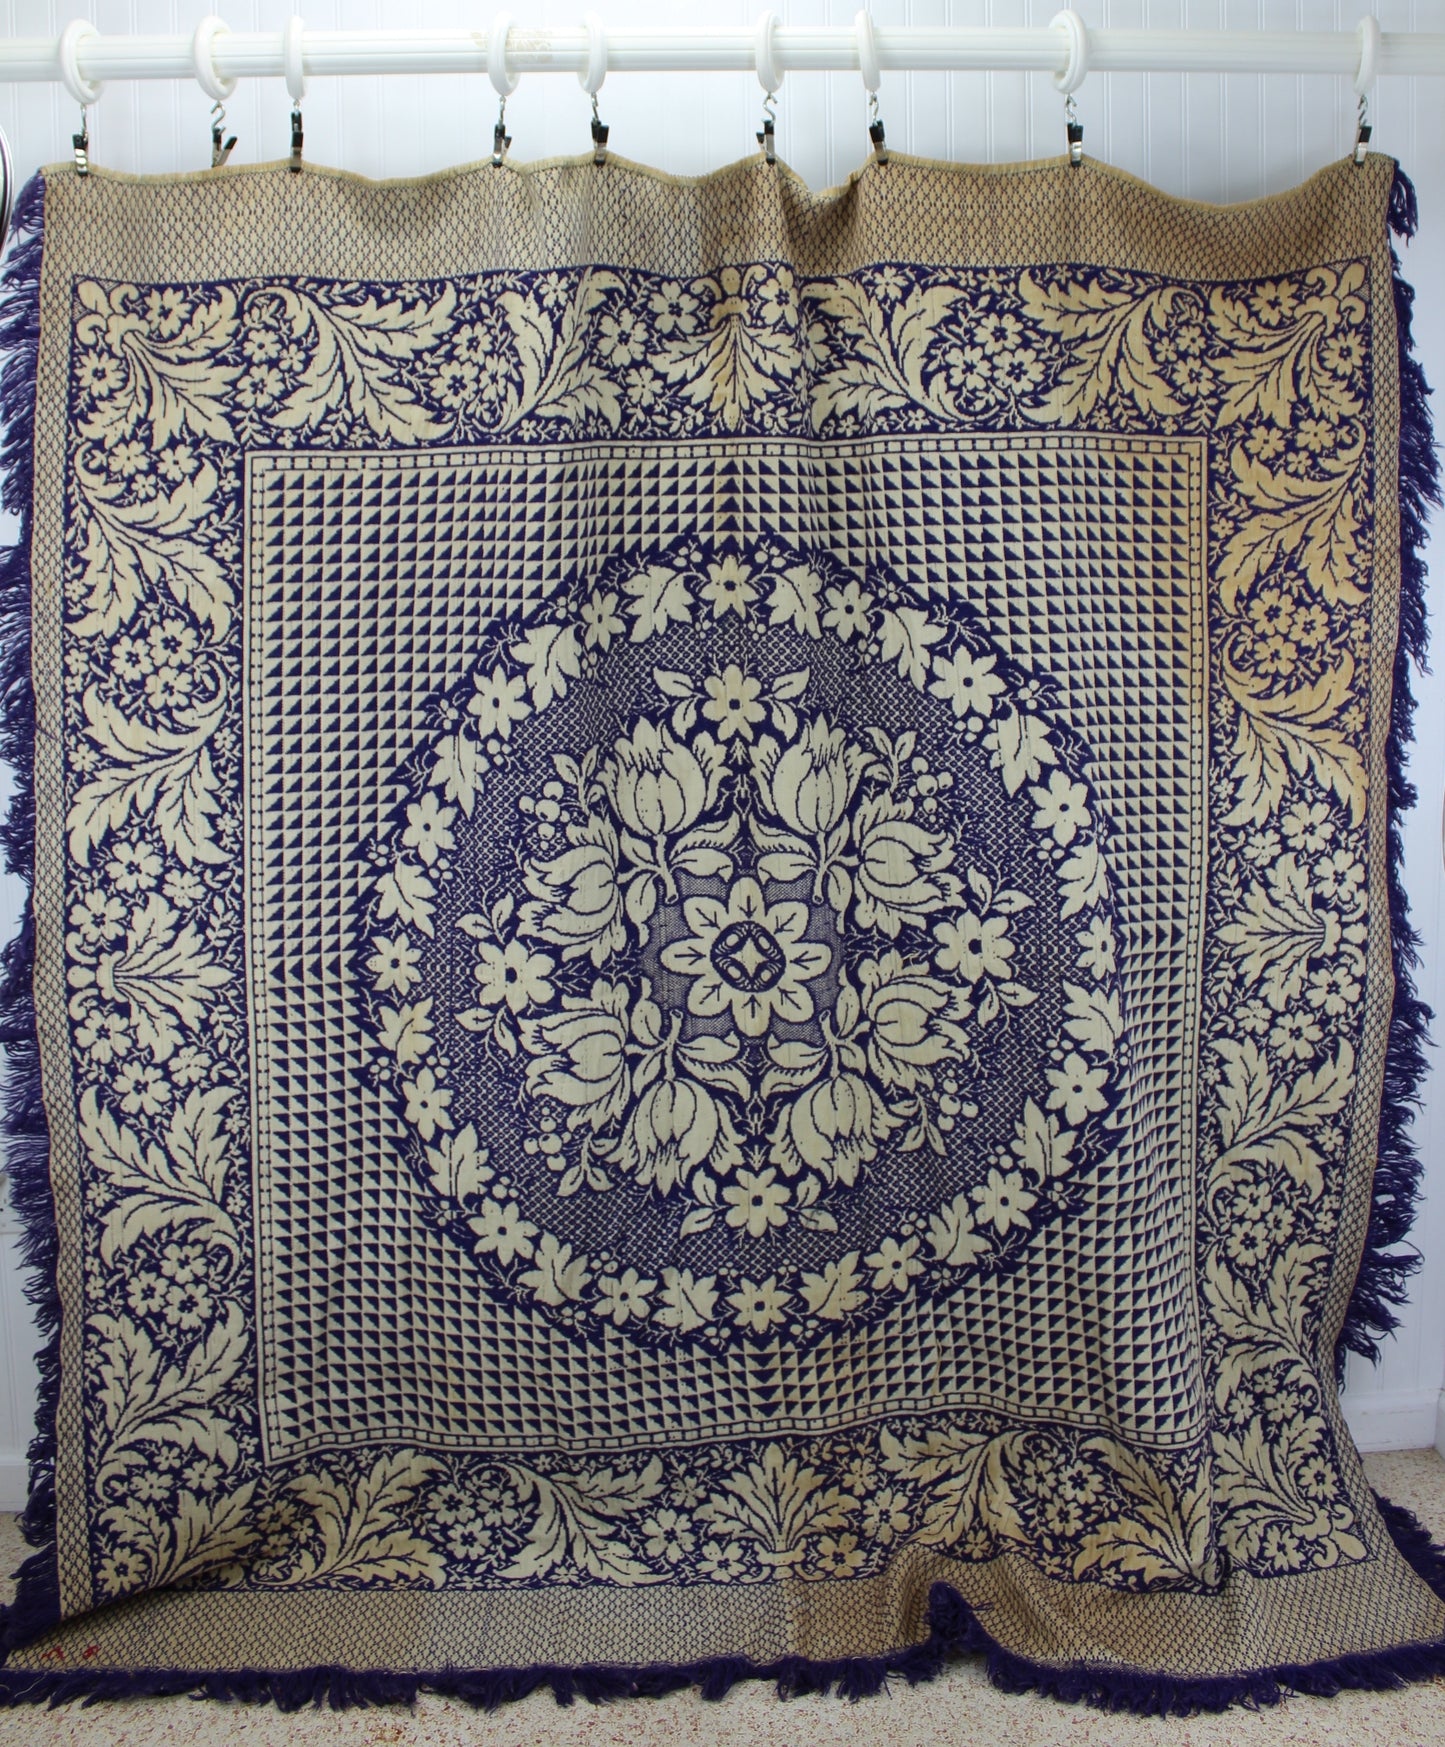 Antique Jacquard Coverlet - Indigo Purple Floral Medallion Geometric - Initials A E - Intricate All Over Design loomed antique coverlet blanket